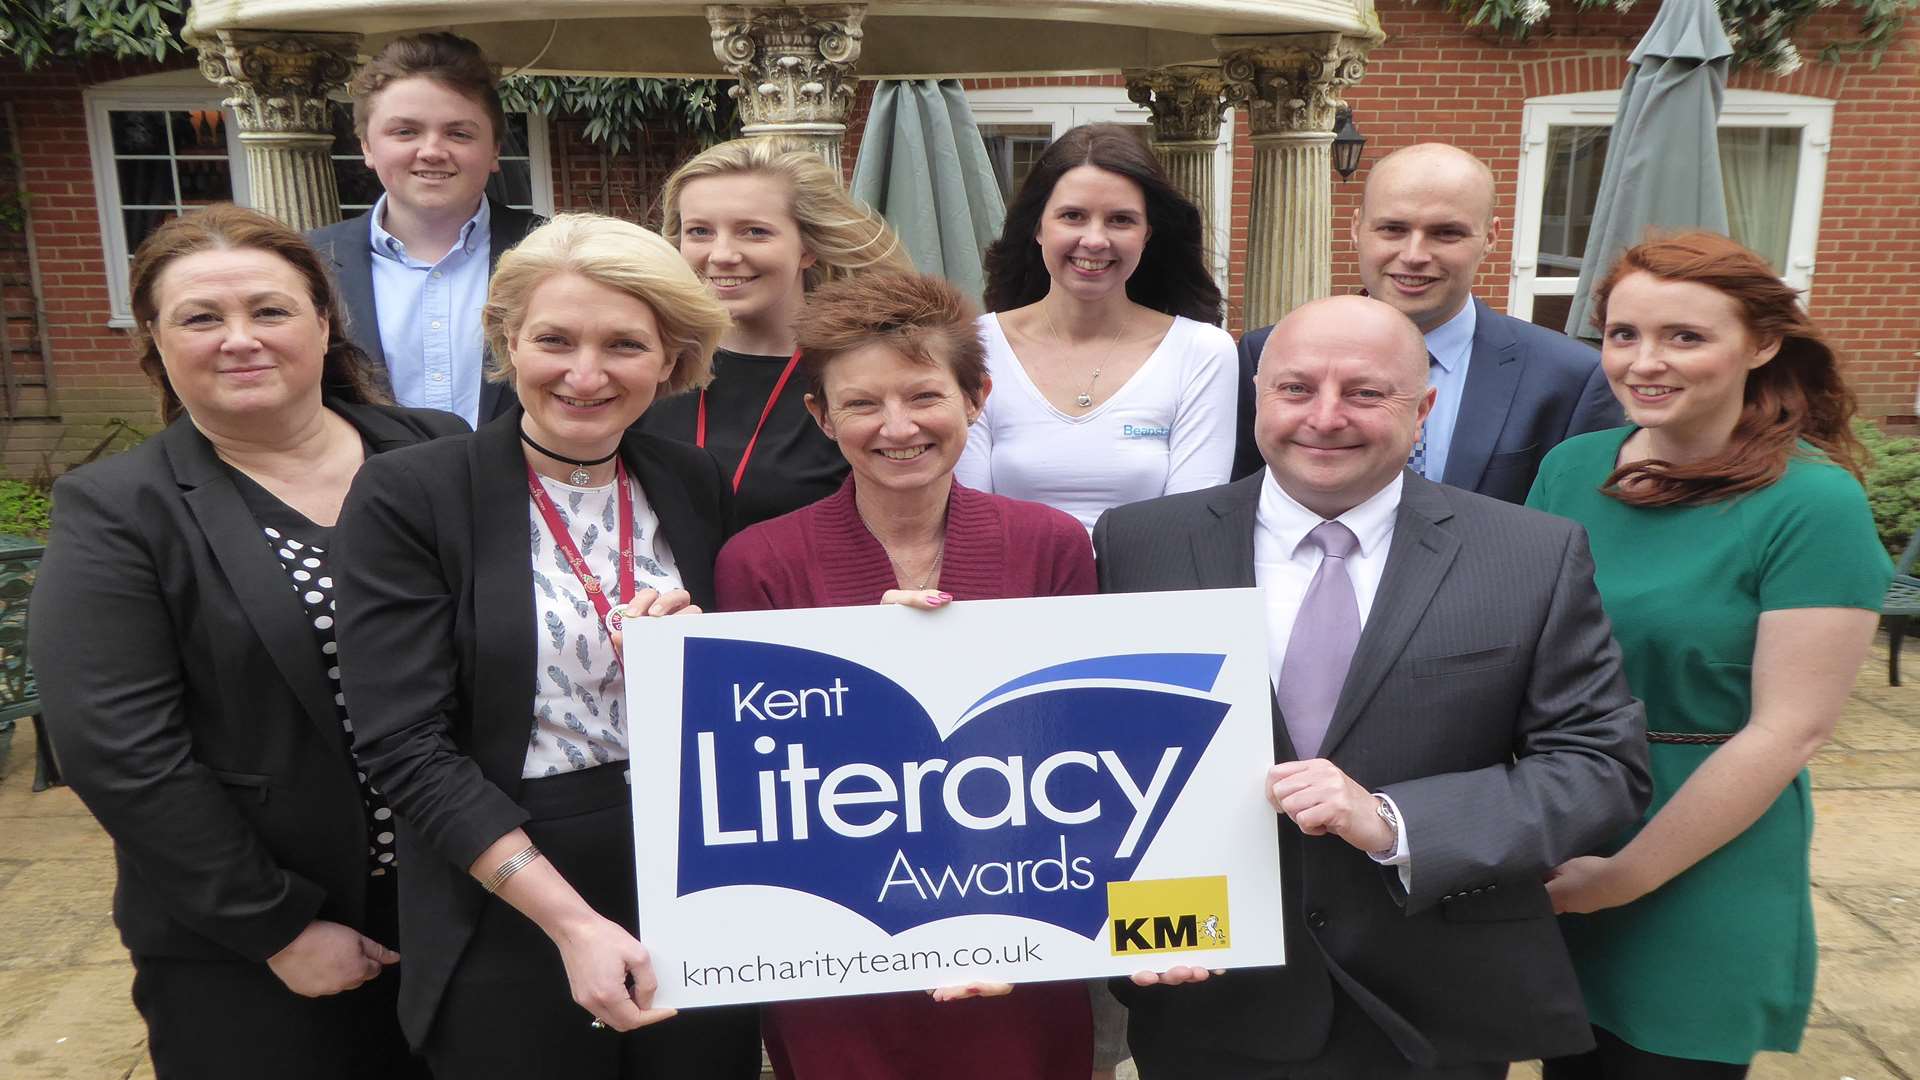 Judges of the Kent Literacy Awards 2017 gather for the event's relaunch at Hempstead House Hotel.